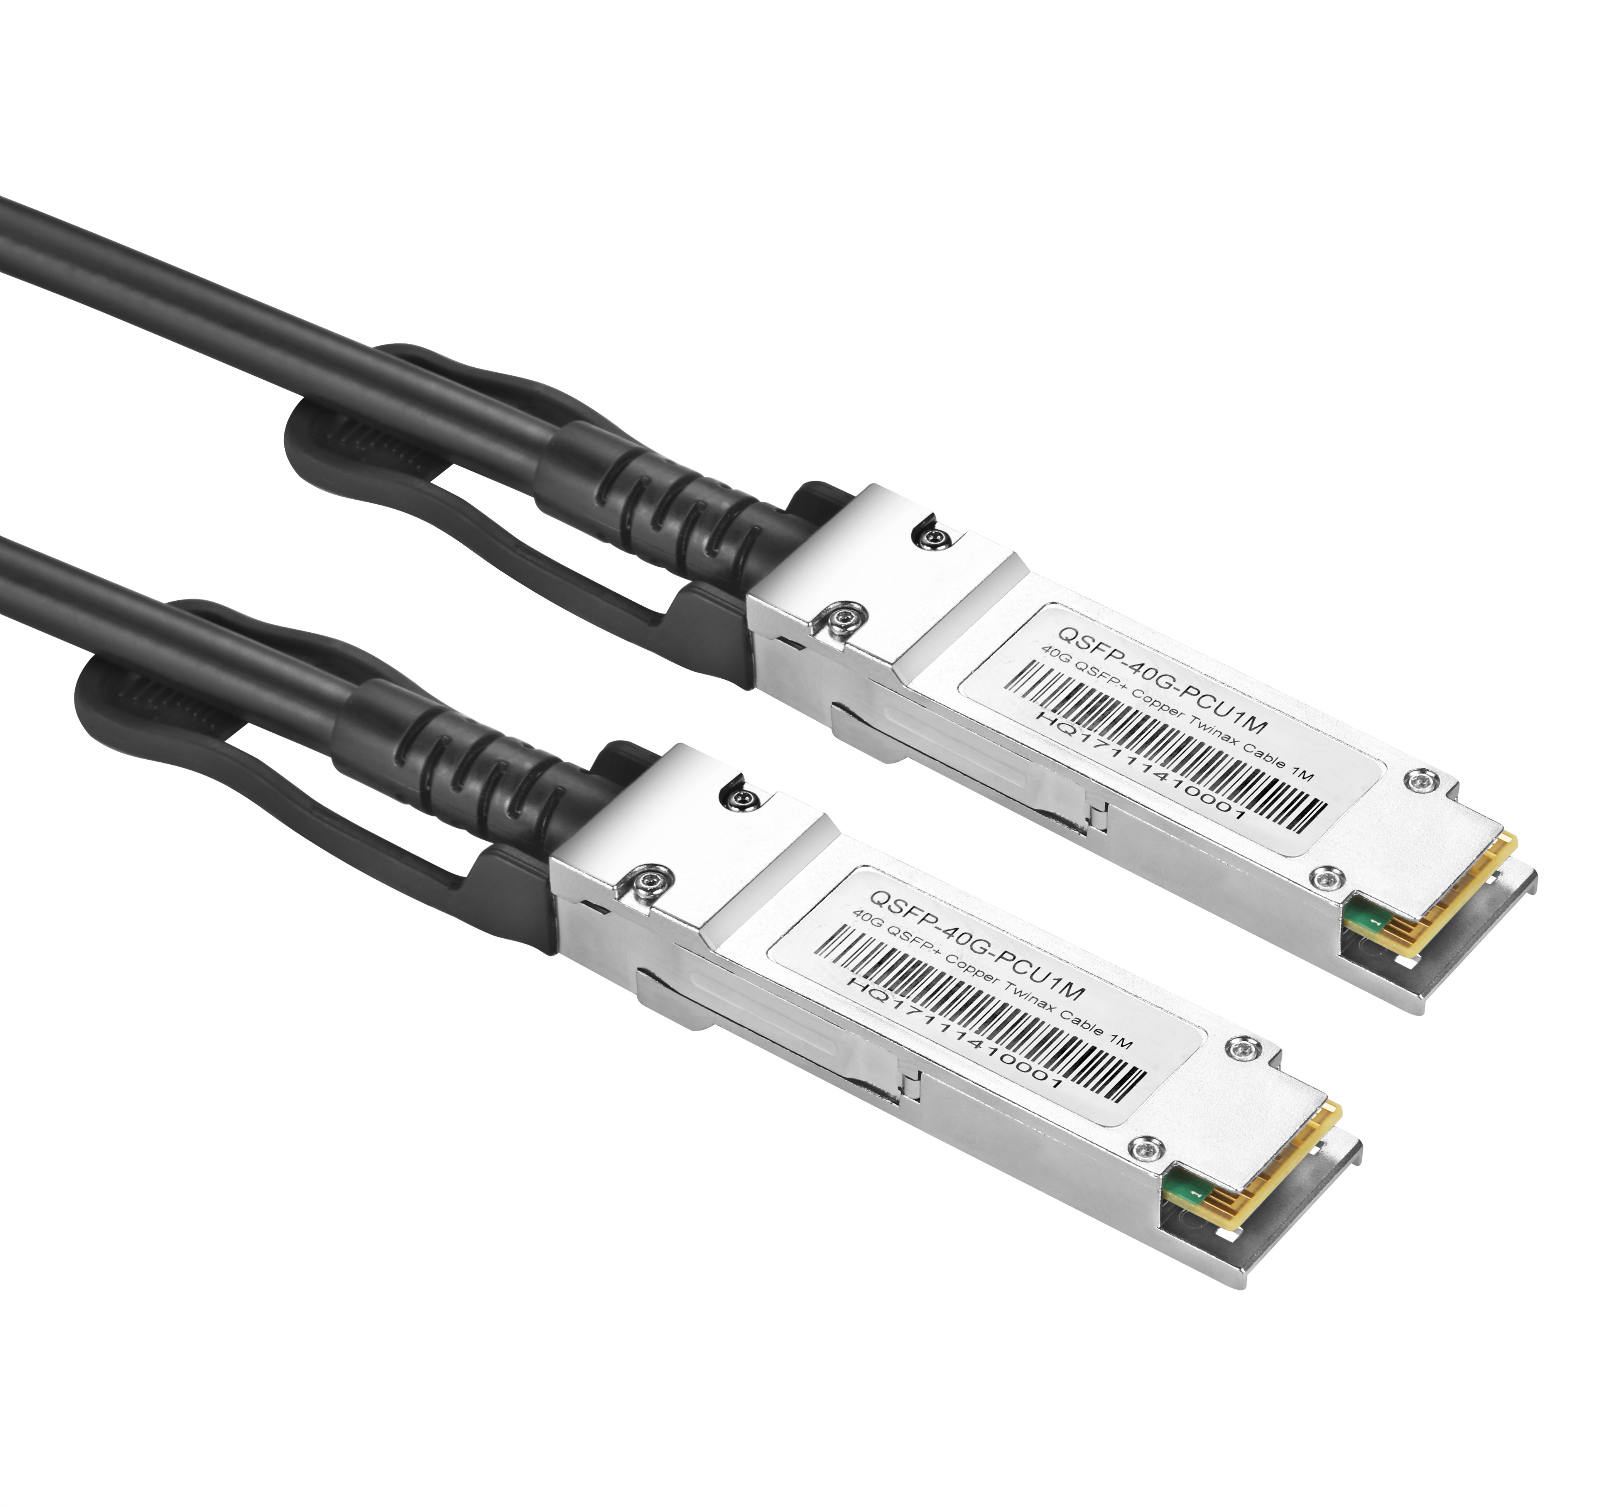 10G SFP DAC 2M CISCOpreferred HTD-InforDAC  Cable,it has a 